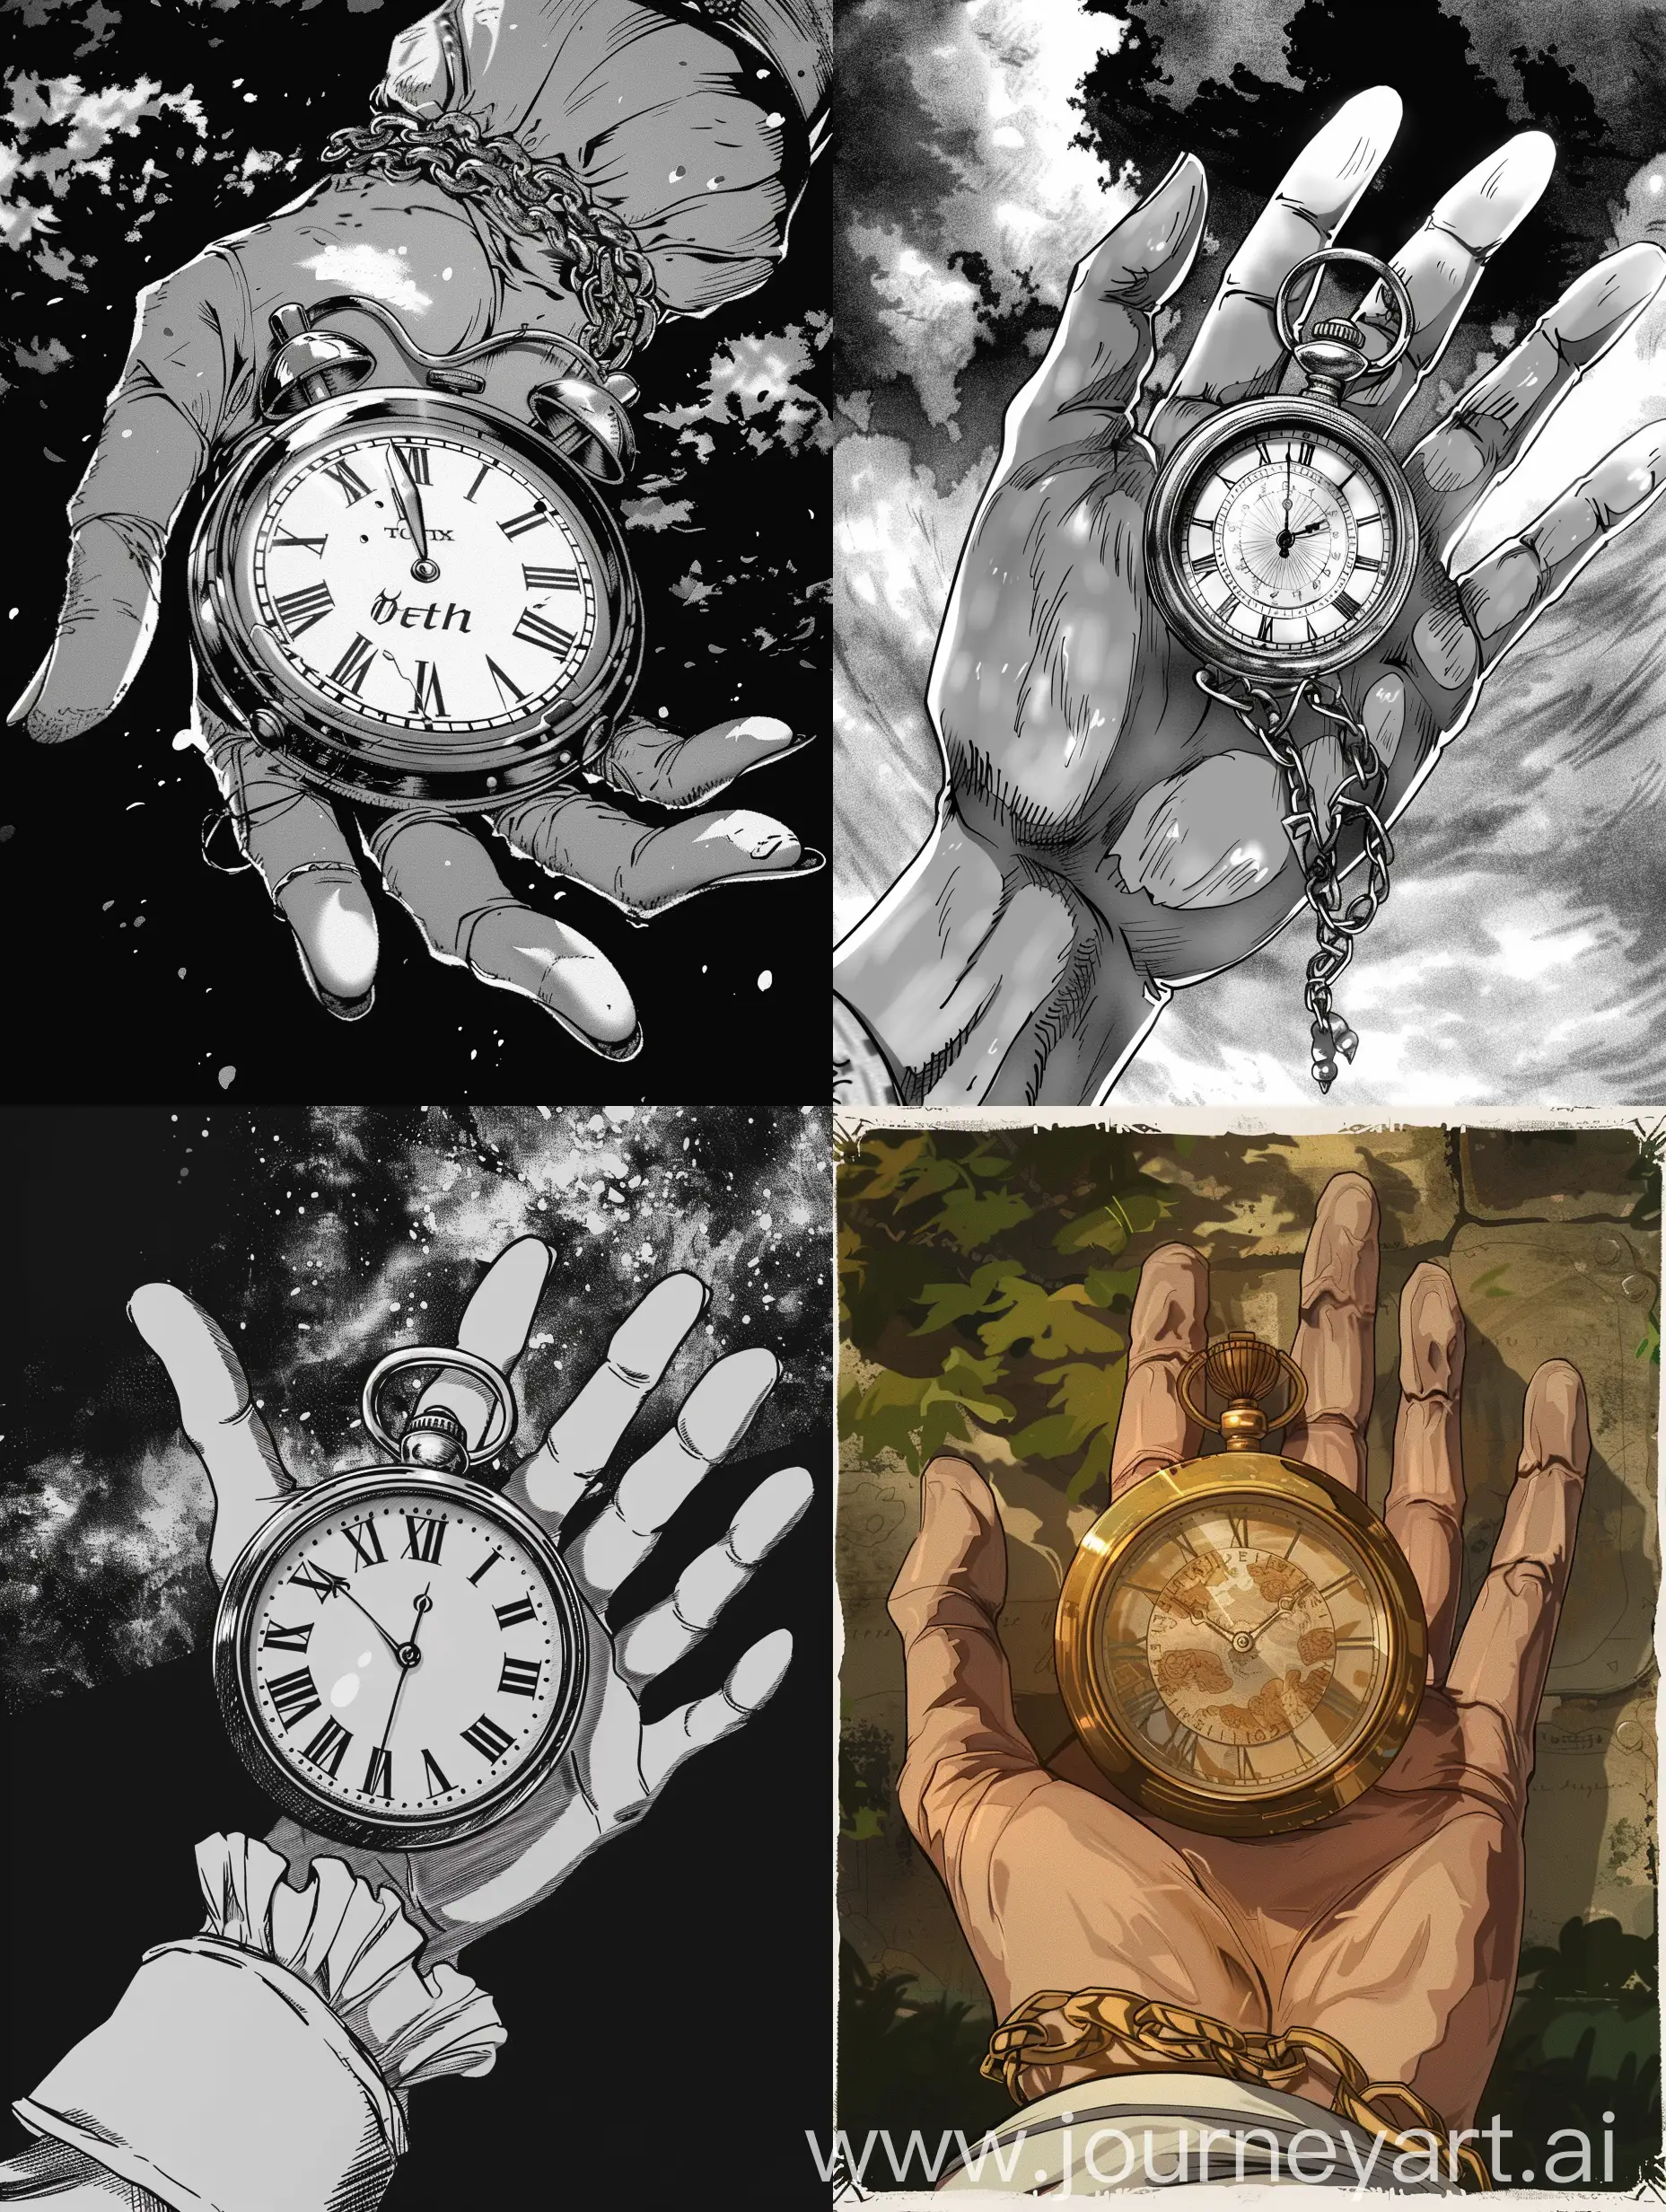 MangaStyle-Time-Amulet-Held-in-Hand